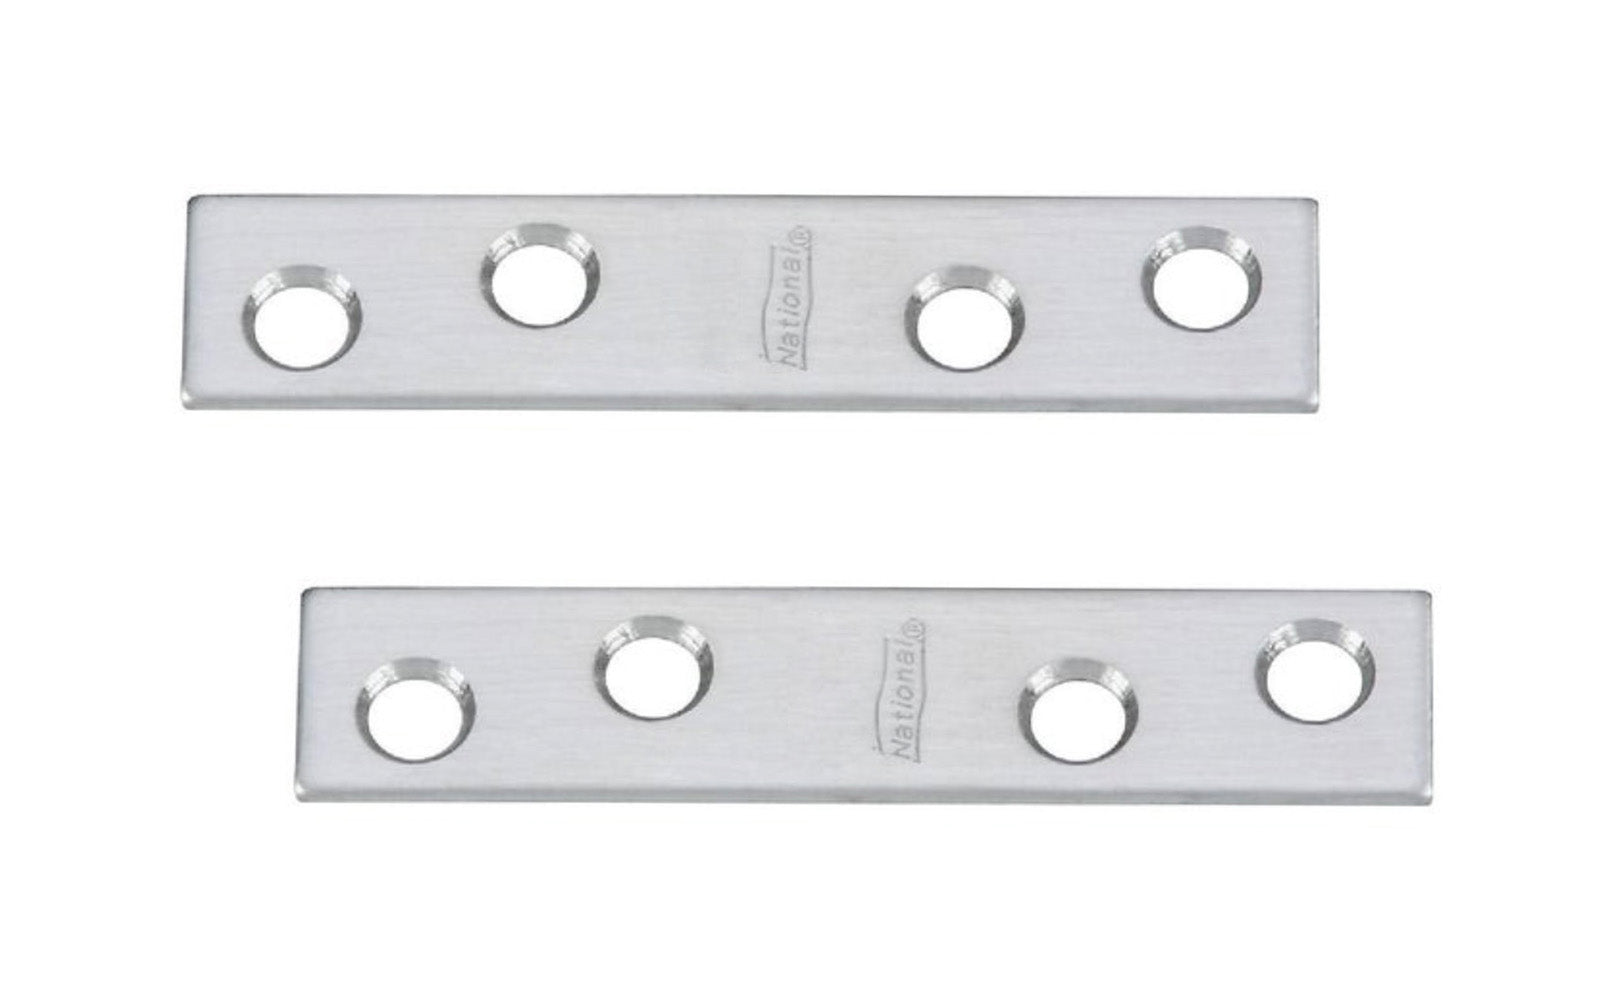 These stainless mending braces are designed for furniture, countertops, shelving support, chests, cabinets, etc. Allows for quick & easy repair of items & other home, workshop, & industrial applications. Made of stainless steel material for maximum protection from corrosion. Sold as a pair of mending plates. Includes fasteners. 2 Pack. National Hardware Model No. N348-367.